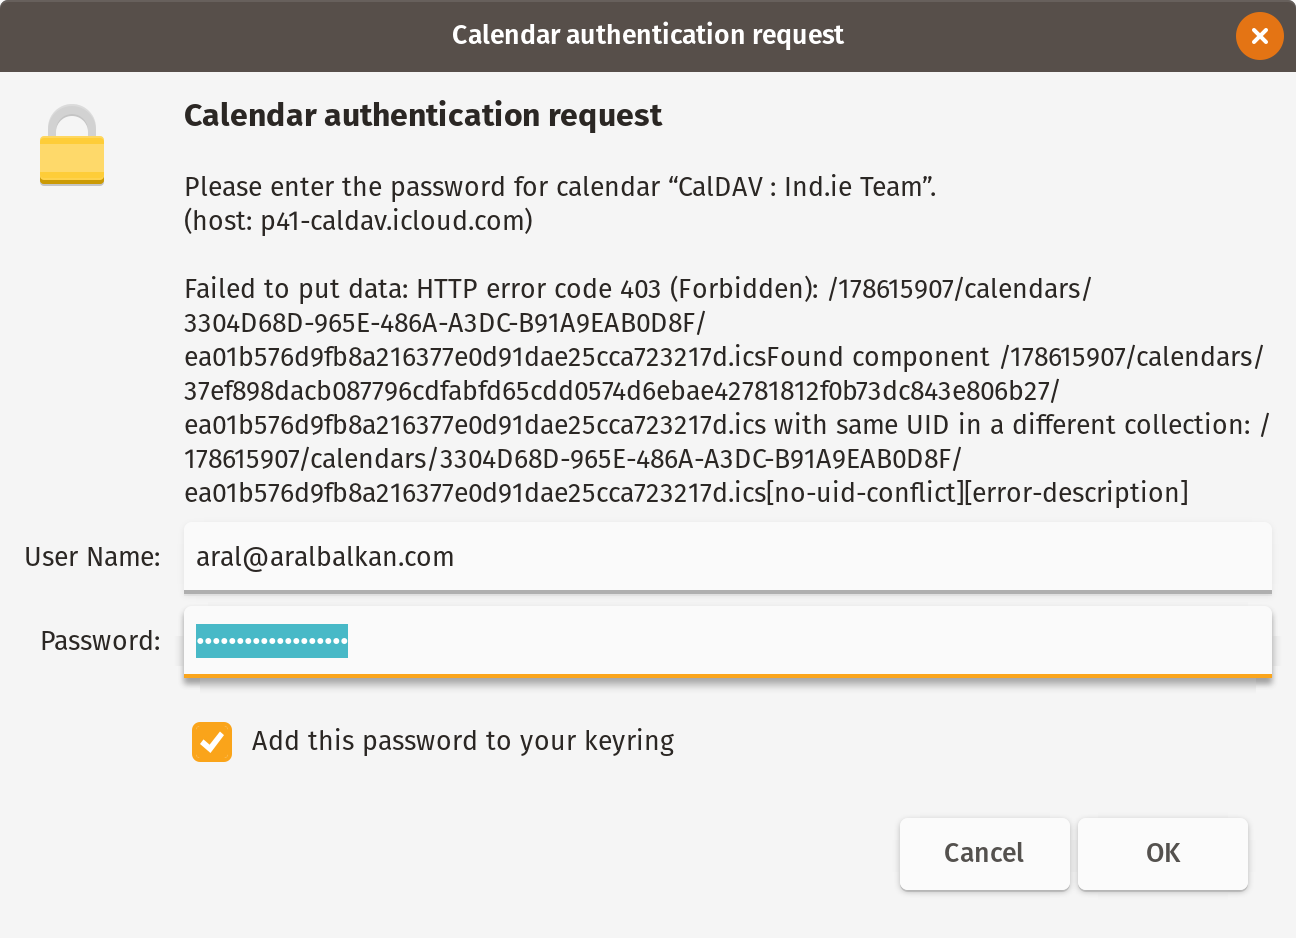 Error dialogue: Calendar authentication request. Failed to put data: HTTP error code 403 (Forbidden): Found component … with same UID in a different collection.